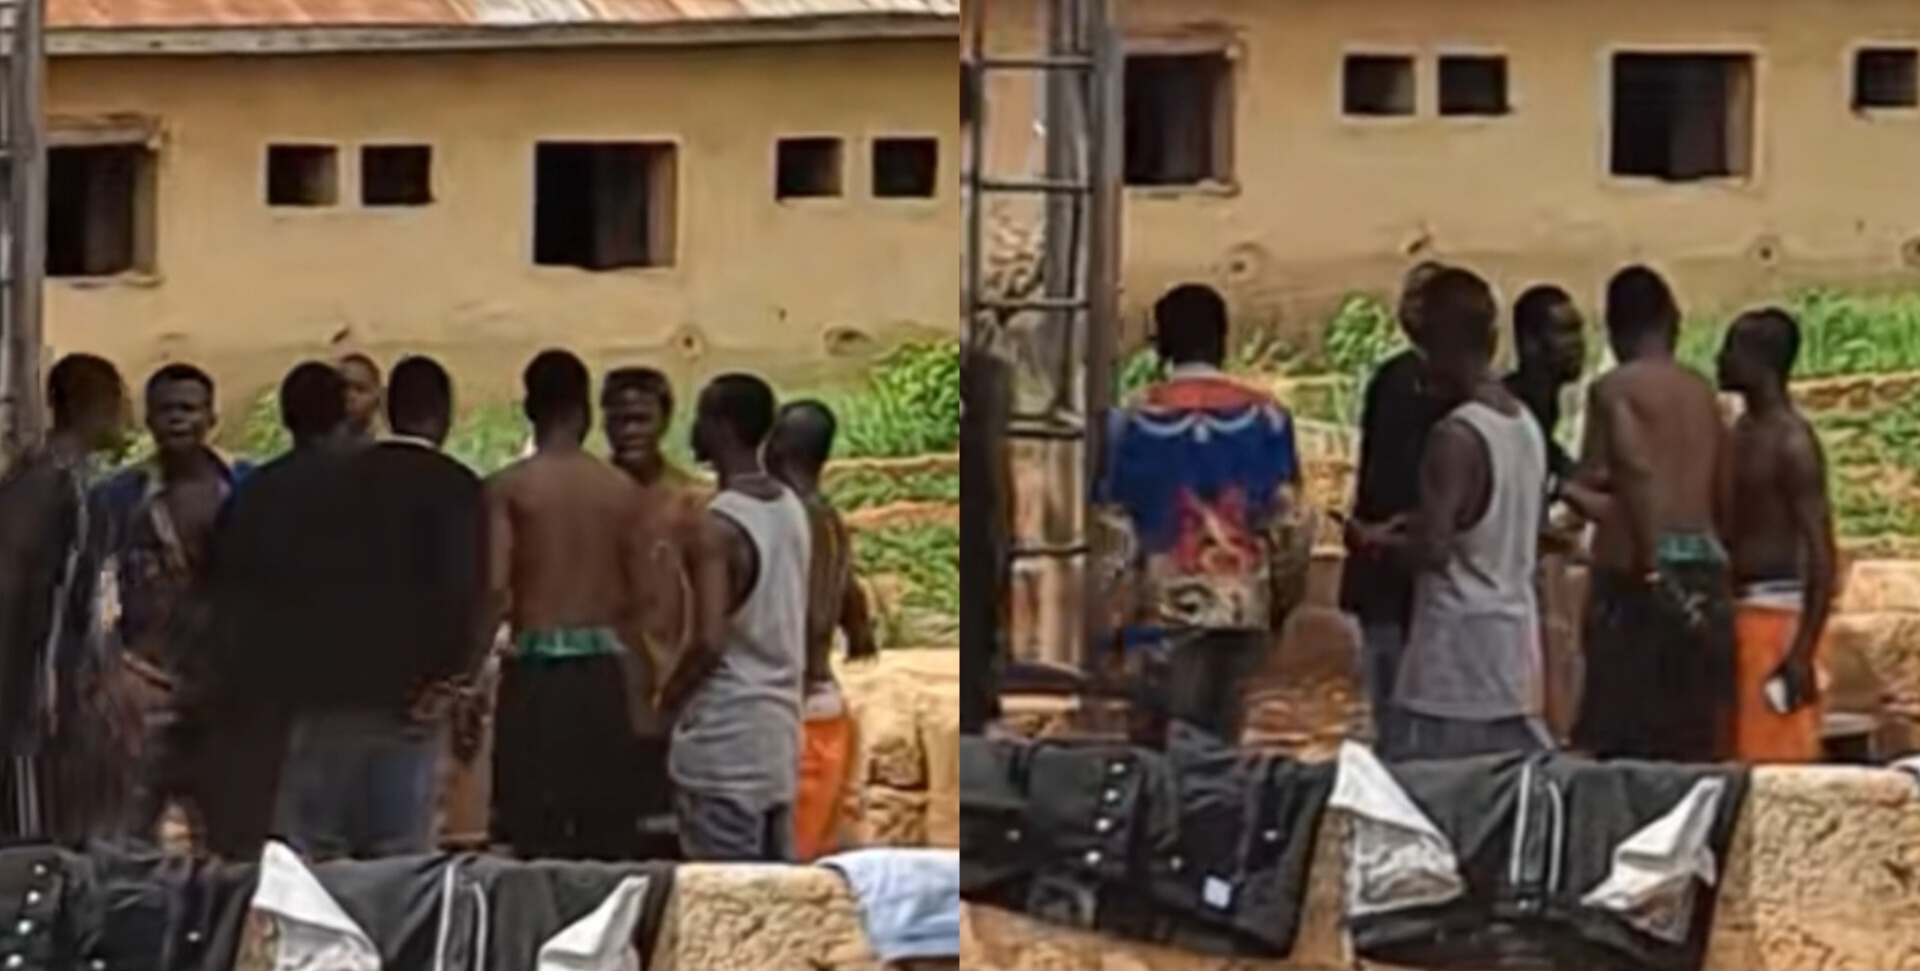 Some young guys were seen arguing about the ongoing Wizkid and Davido drama.